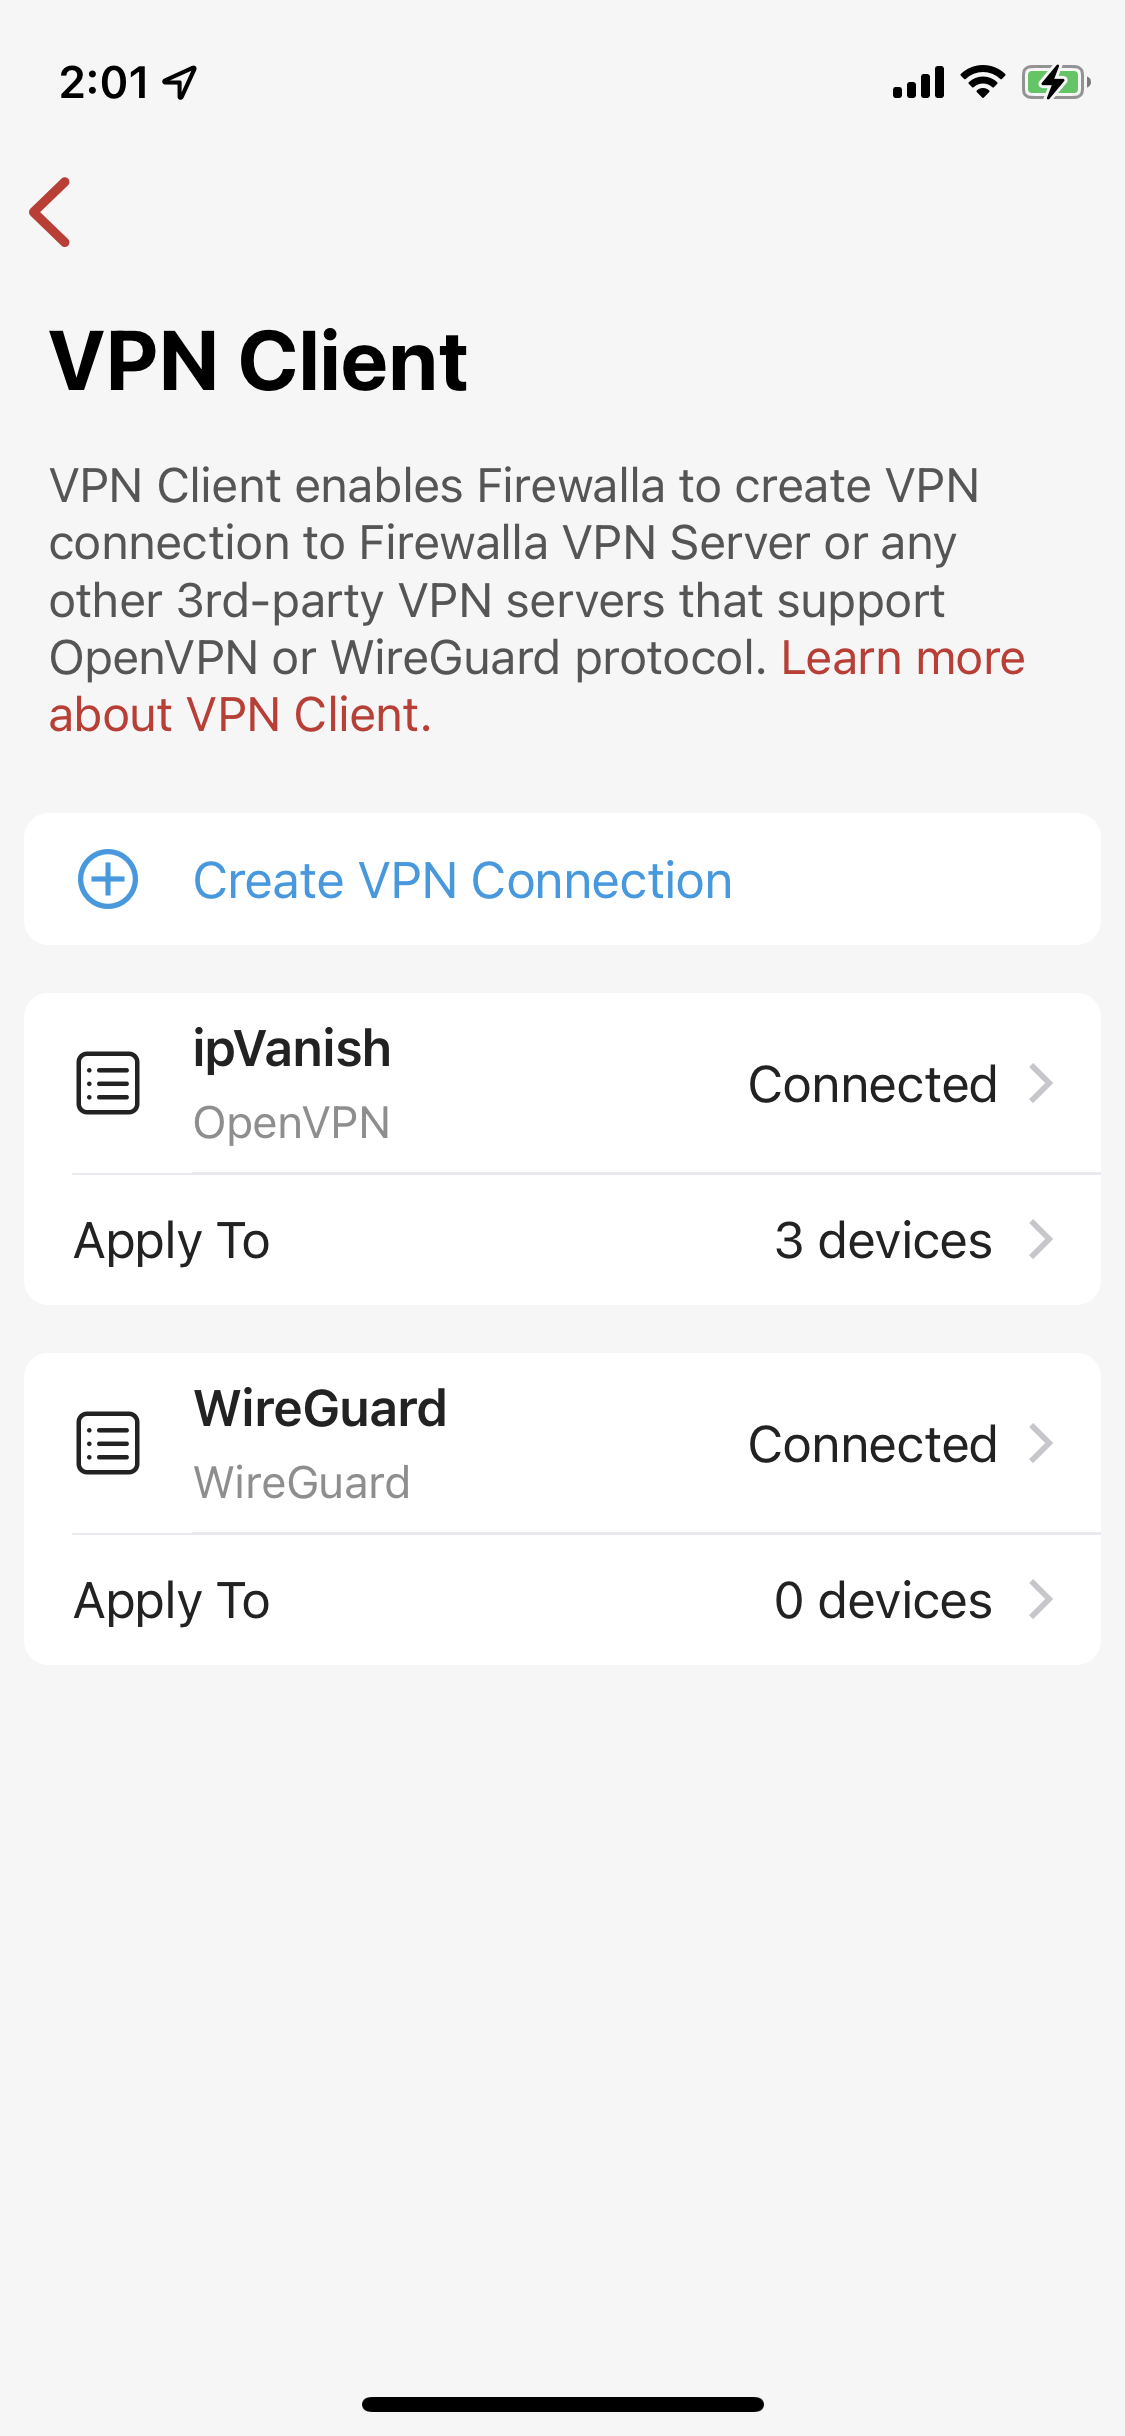 Route device traffic to VPN Client, Set to apply to 0 devices